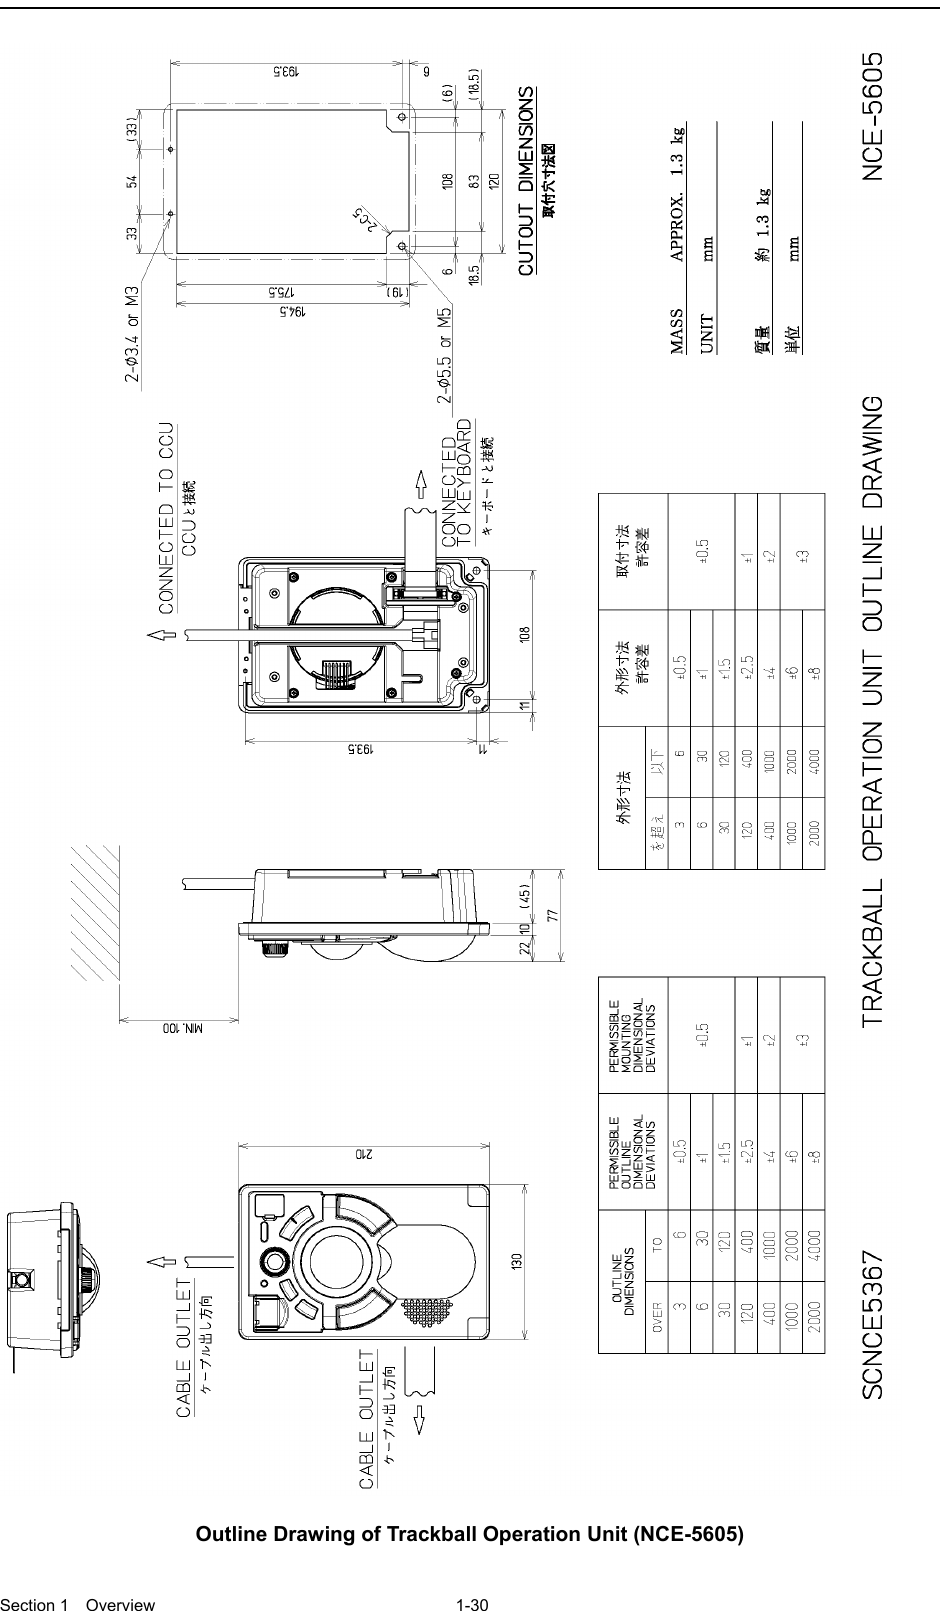  Section 1  Overview 1-30    Outline Drawing of Trackball Operation Unit (NCE-5605) 